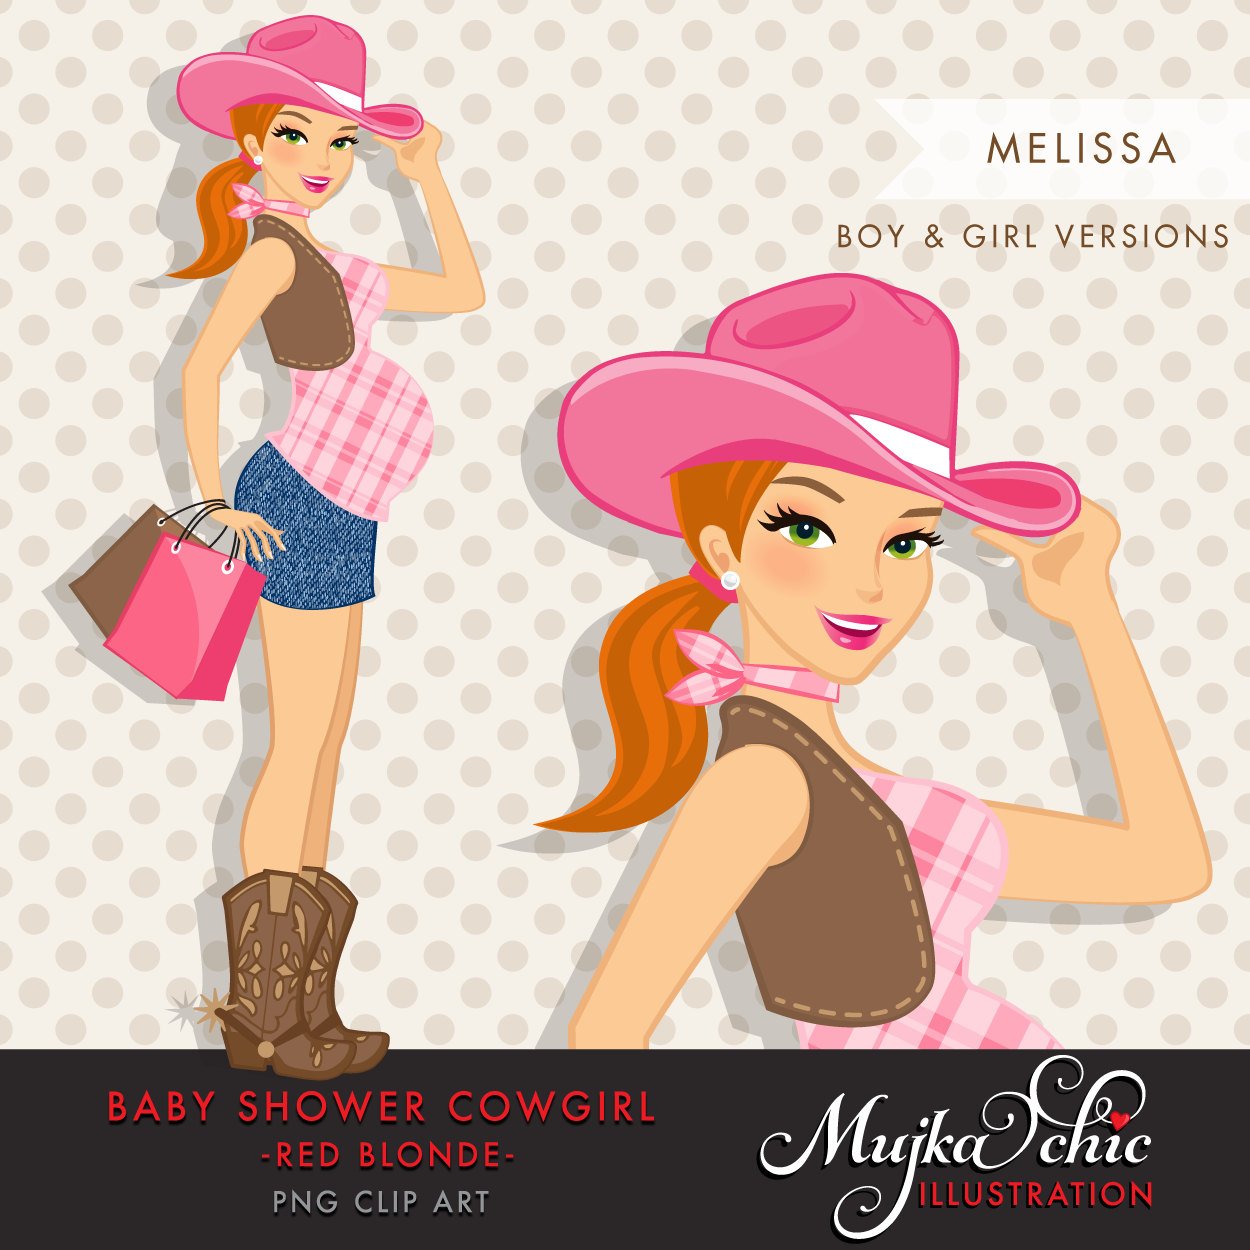 Red Blonde Cowgirl Pregnant Woman Character with gift bags Clipart. Baby Shower Party Invitation Character